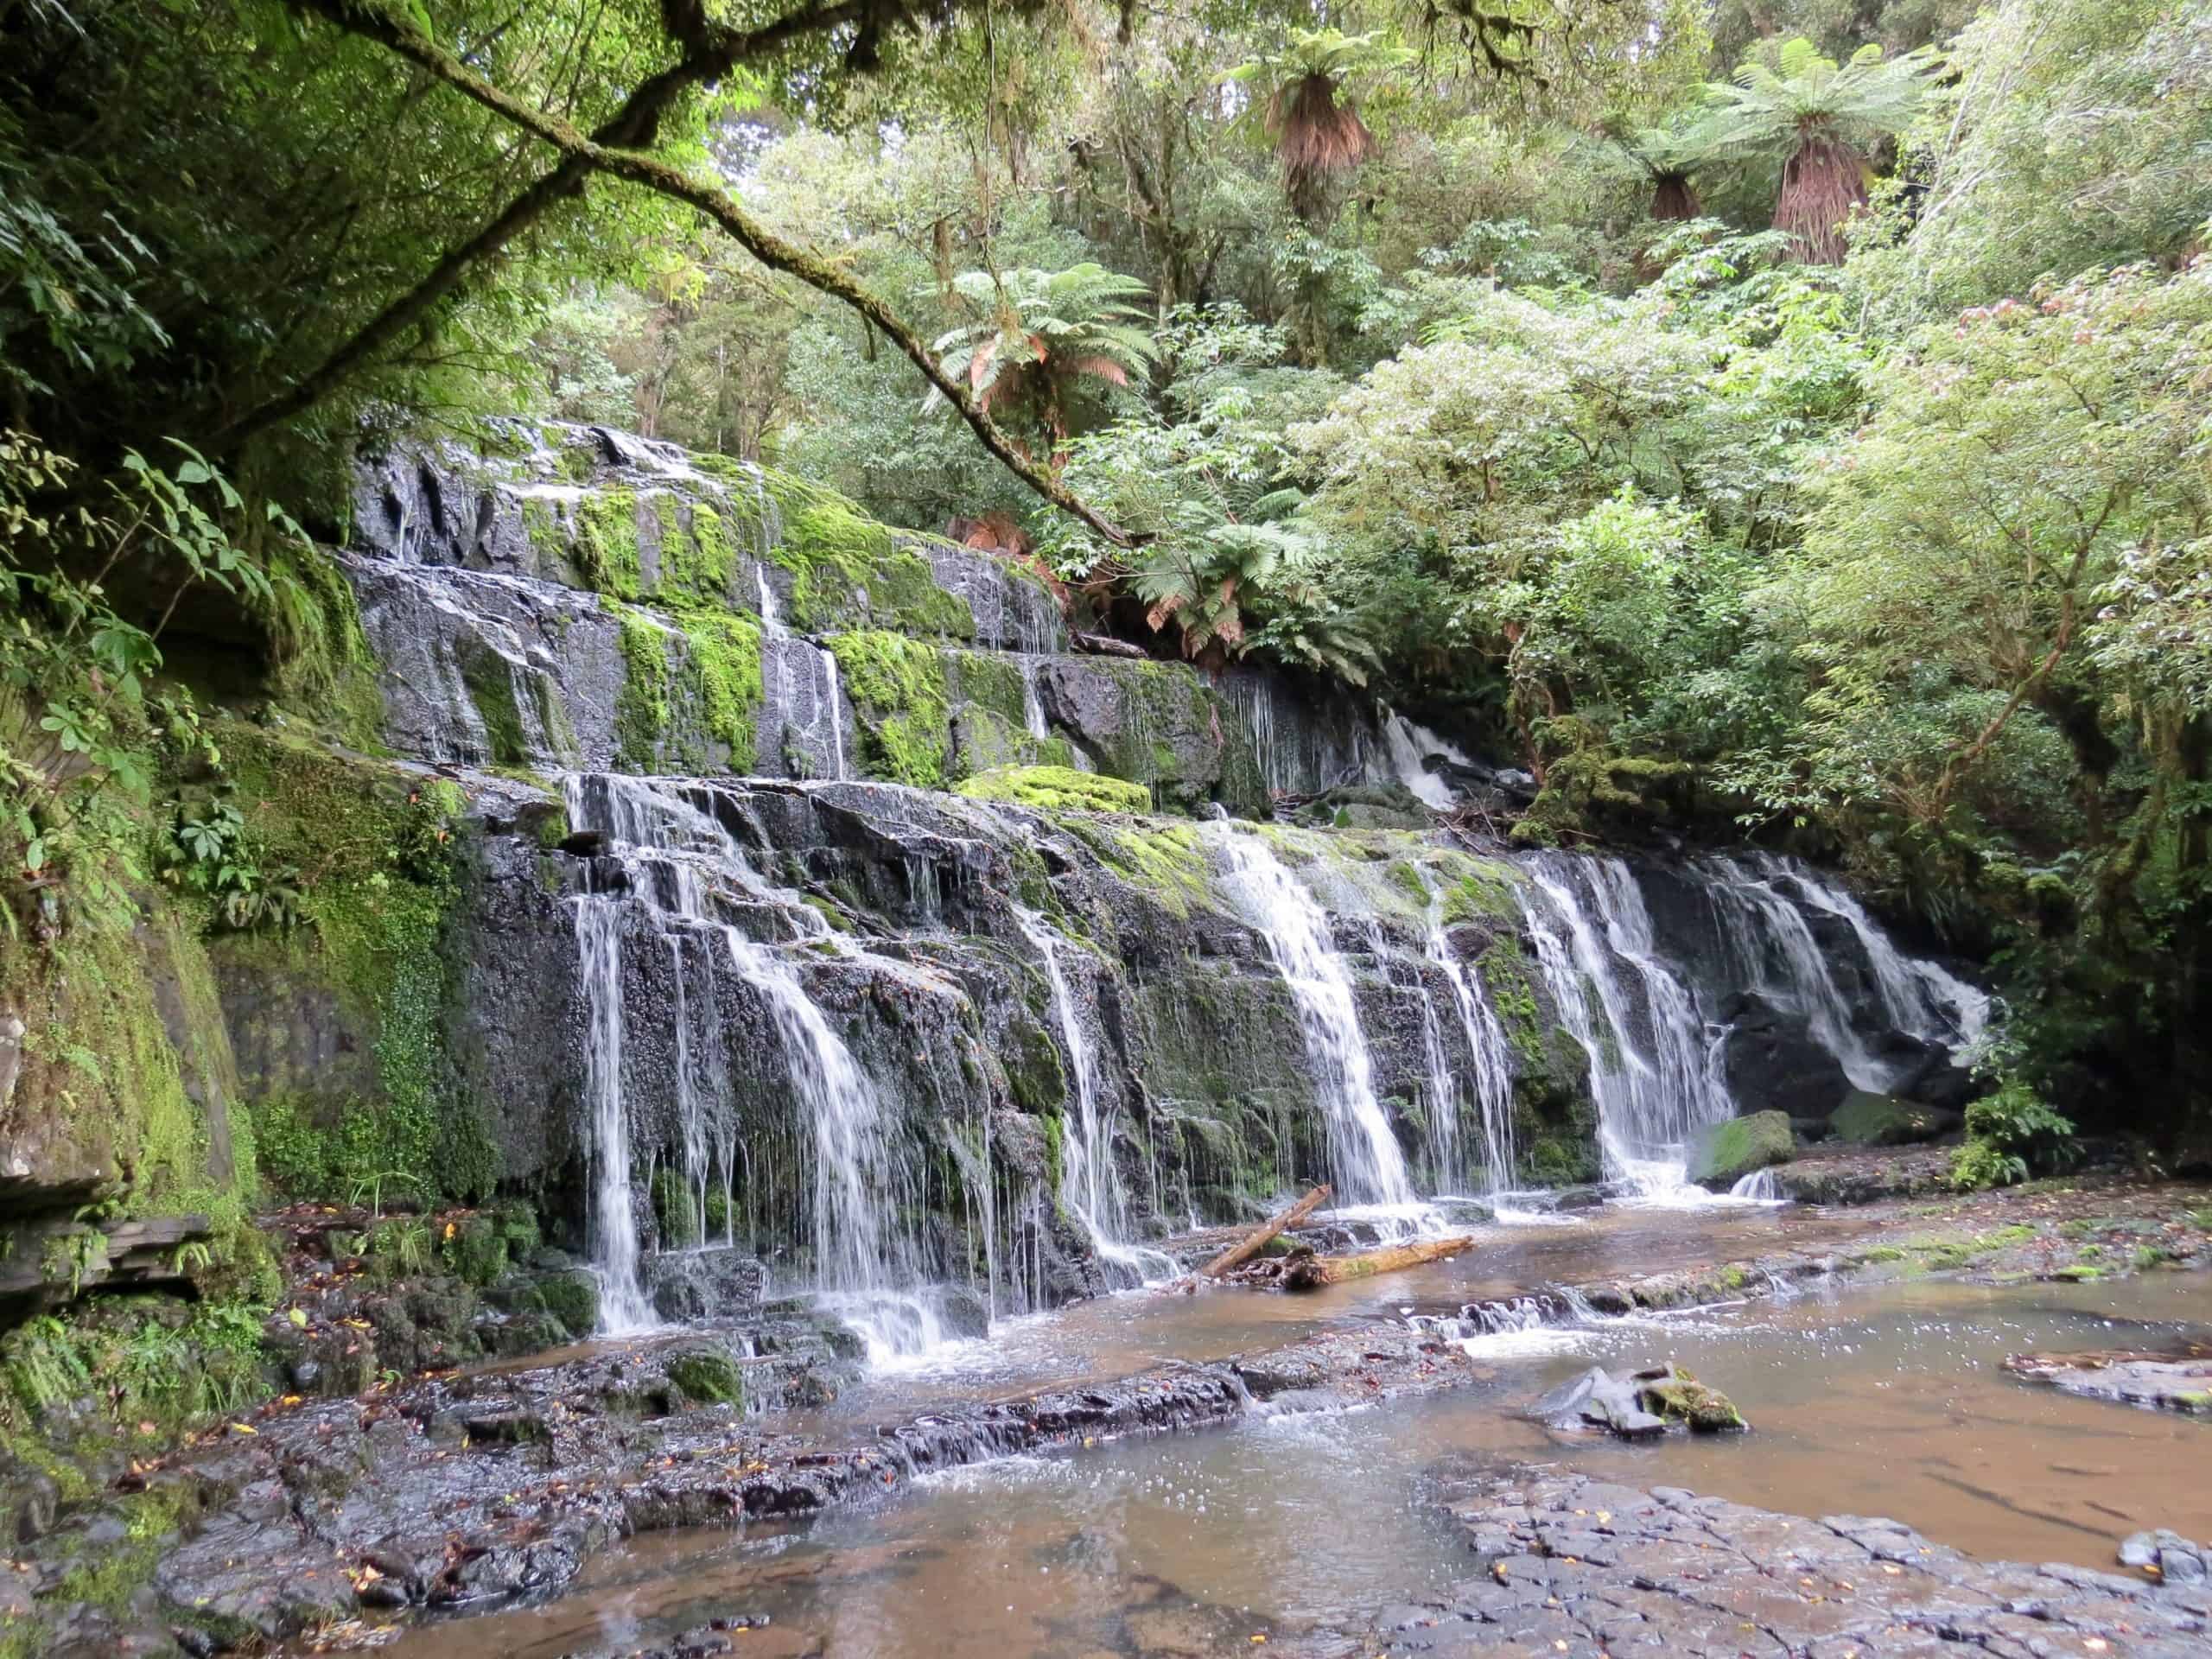 Visiting Purakaunui Falls is one of the top things to do in the Catlins Coast